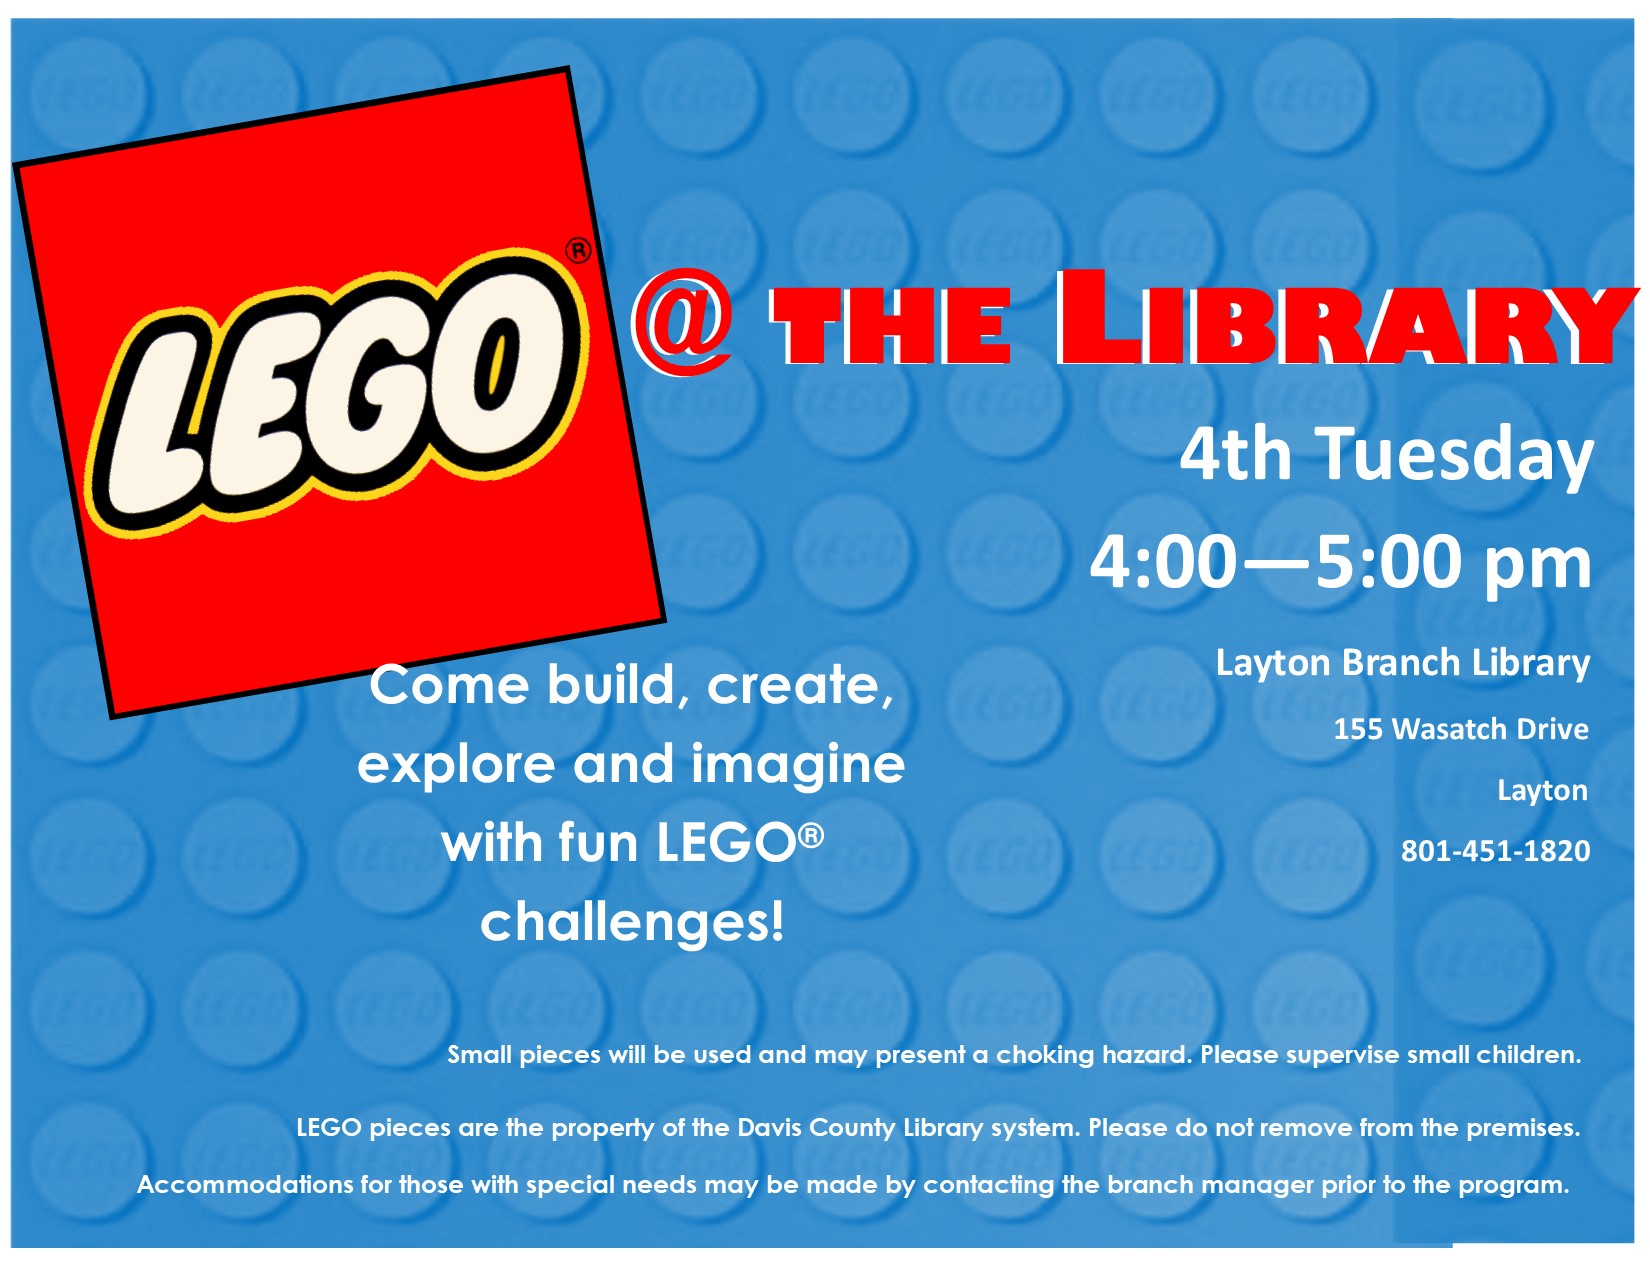 LEGO at the Library - Layton Branch Library every 4th Tuesday of the month from 4 - 5 pm.  Come be creative and have some fun with LEGO Bricks!